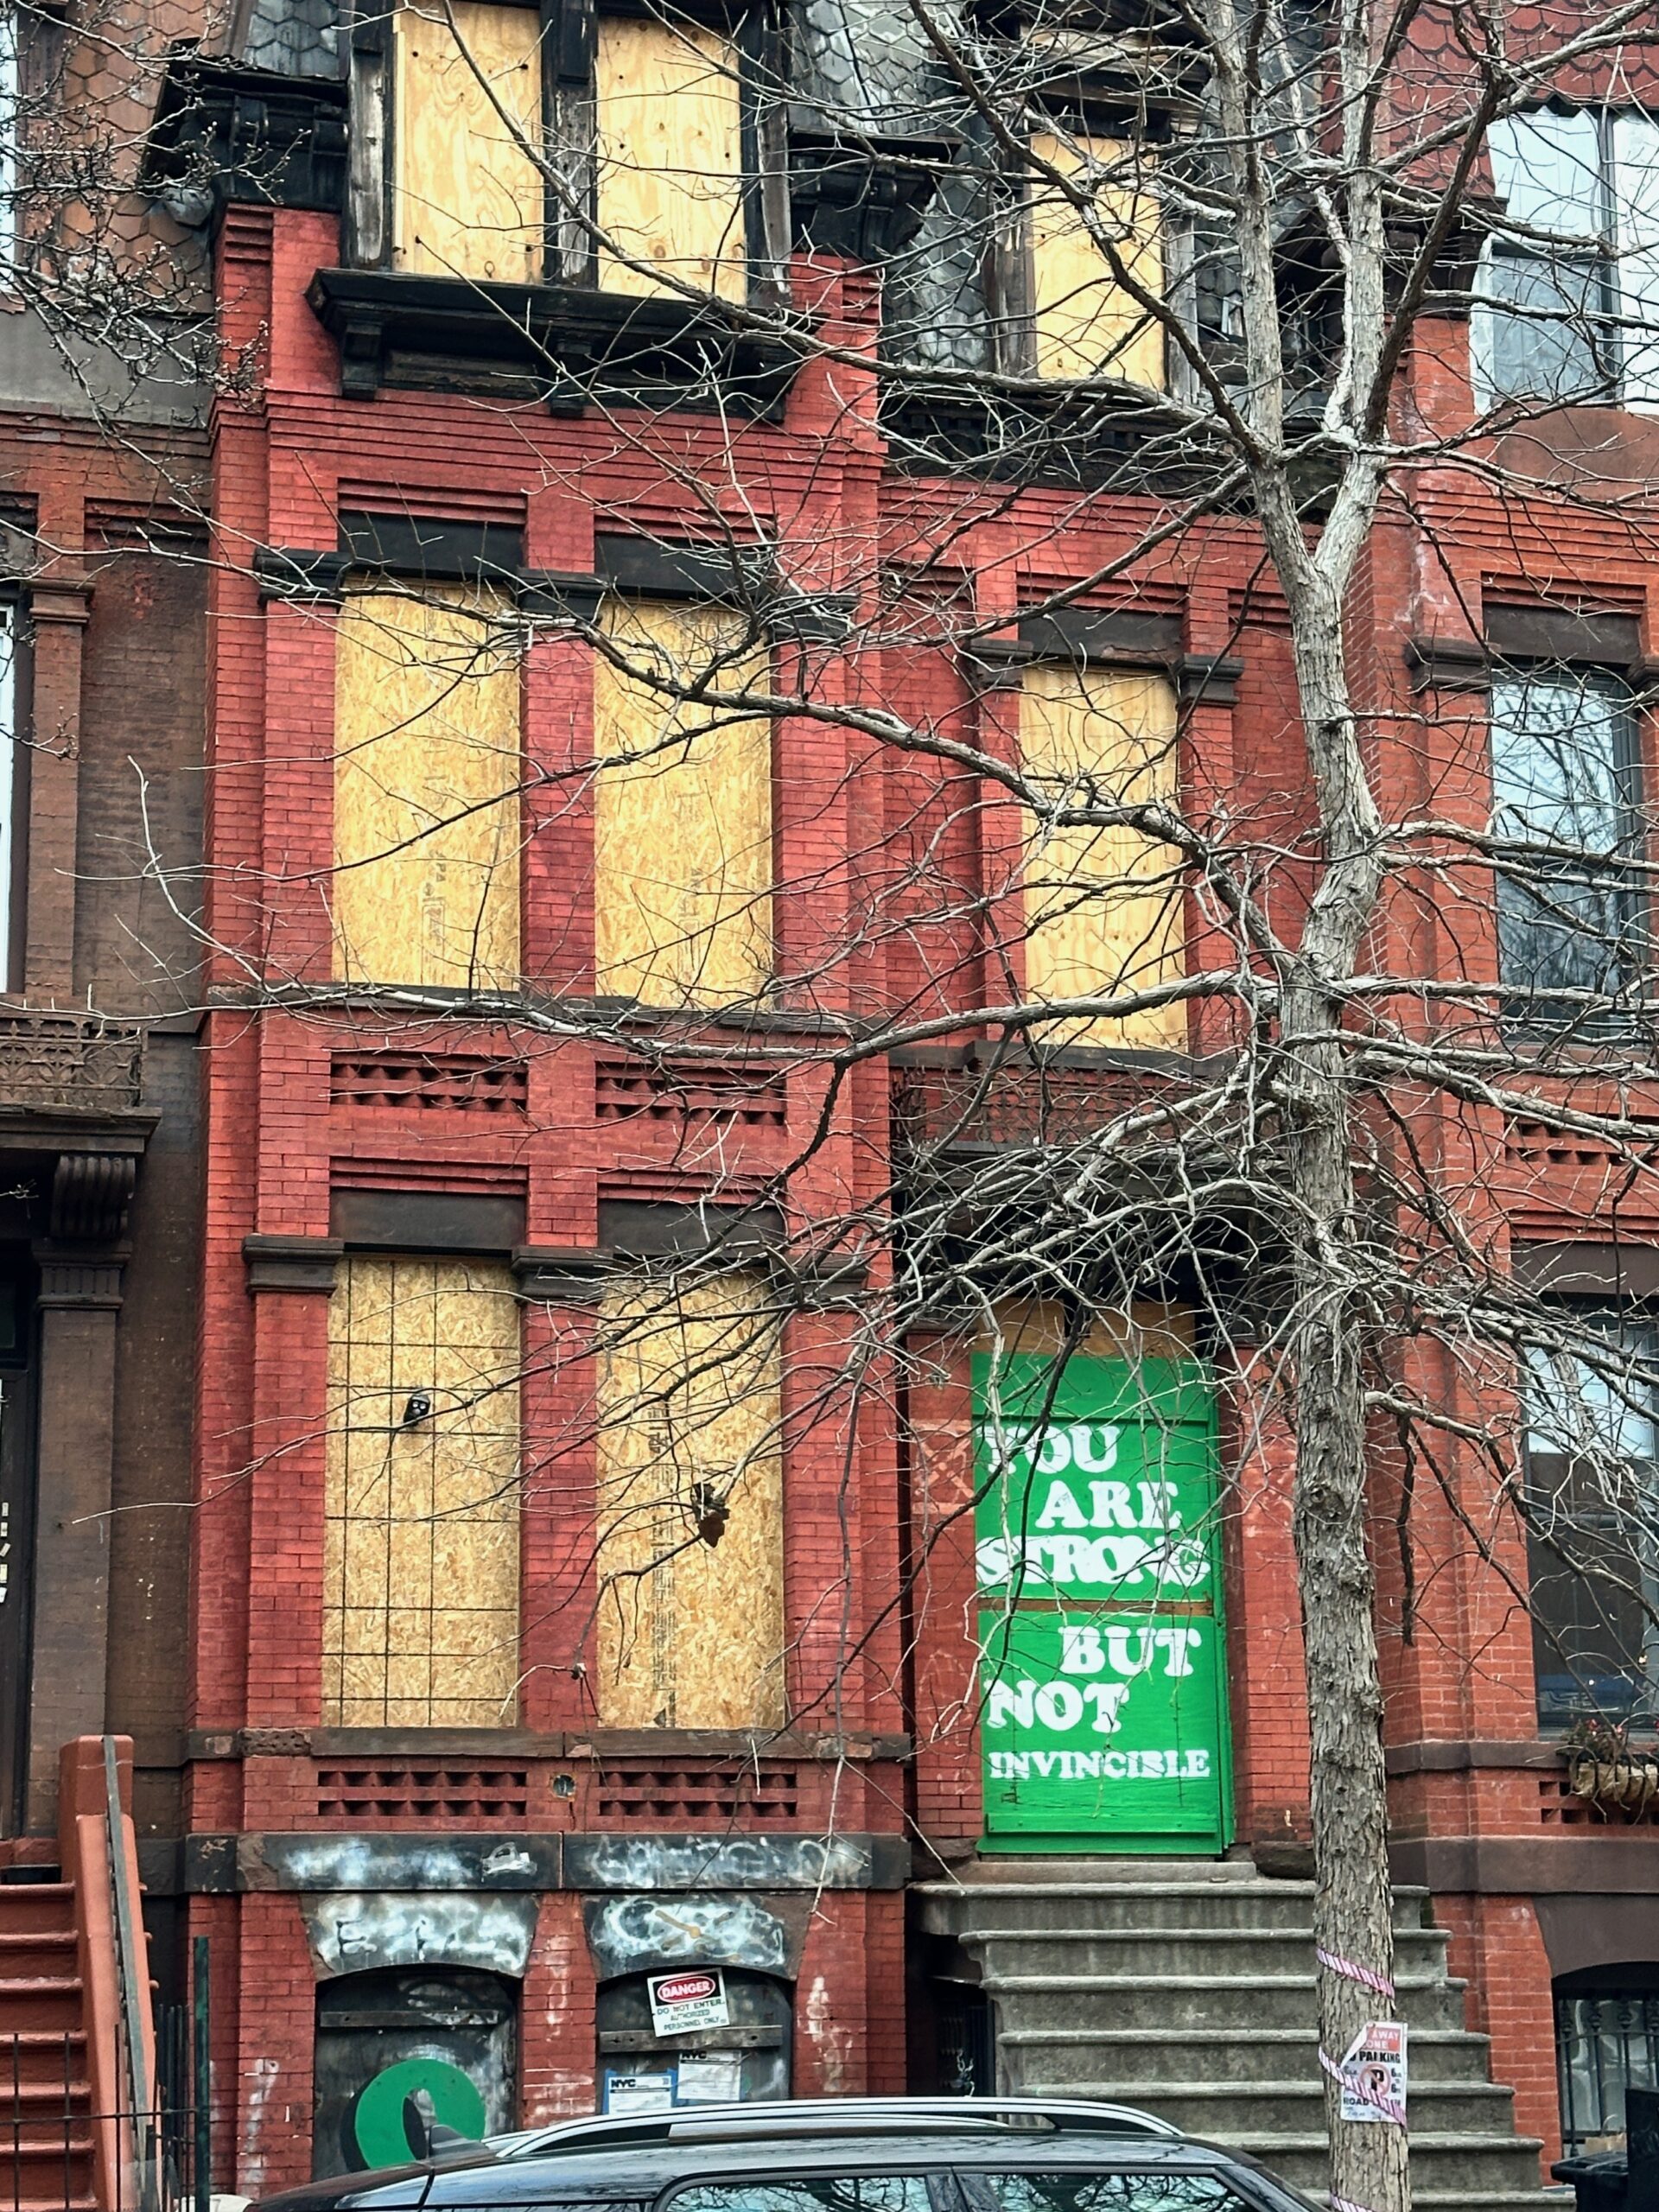 A brick townhouse in Brooklyn with windows covered in raw plywood. The front door is also covered in plywood and boards, painted kelly green, with white lettering that says, "You are strong but not invincible." It's winter, and a tree with bare branches is in the foreground.